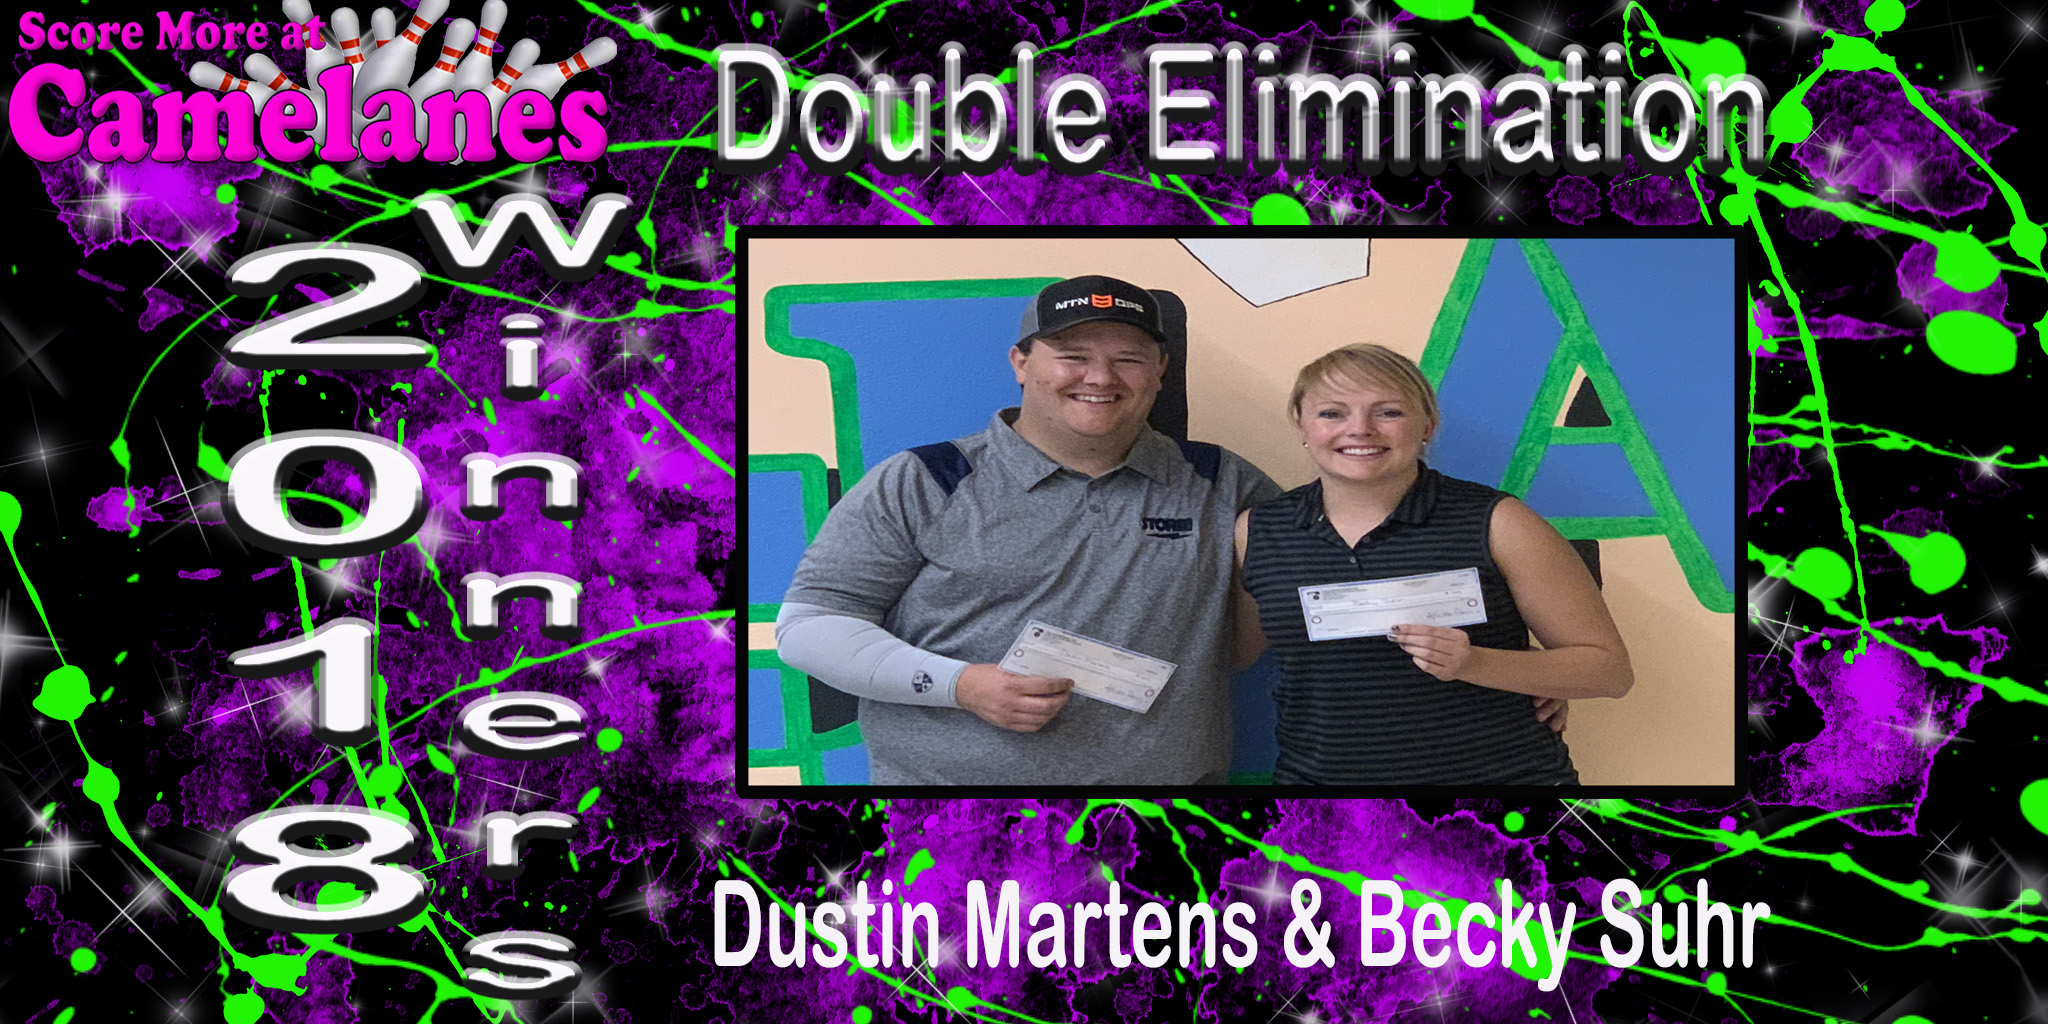 Camelanes Bowling Center 2018 Double Elimination Winners!